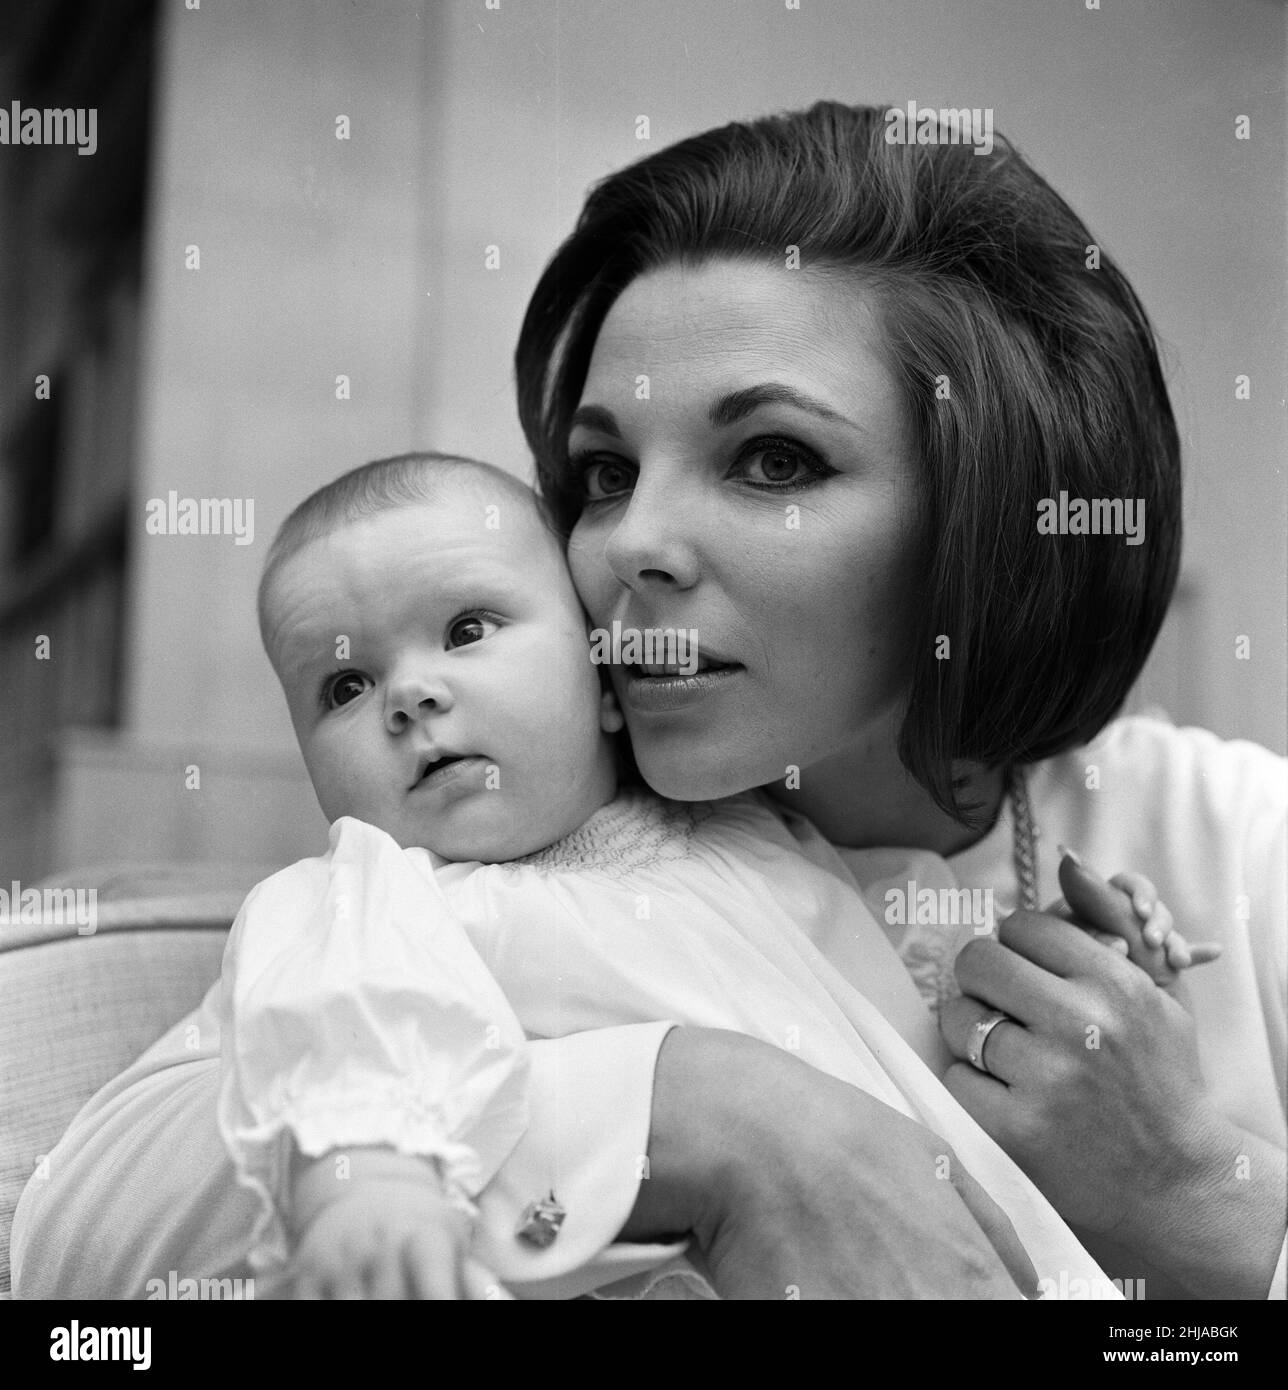 Joan Collins pictured with her four-month-old daughter Tara Newley. They have come home to London to see the family. Here they are today after mum has been in the film studios and baby Tara woke after her sleep. 20th February 1964. Stock Photo